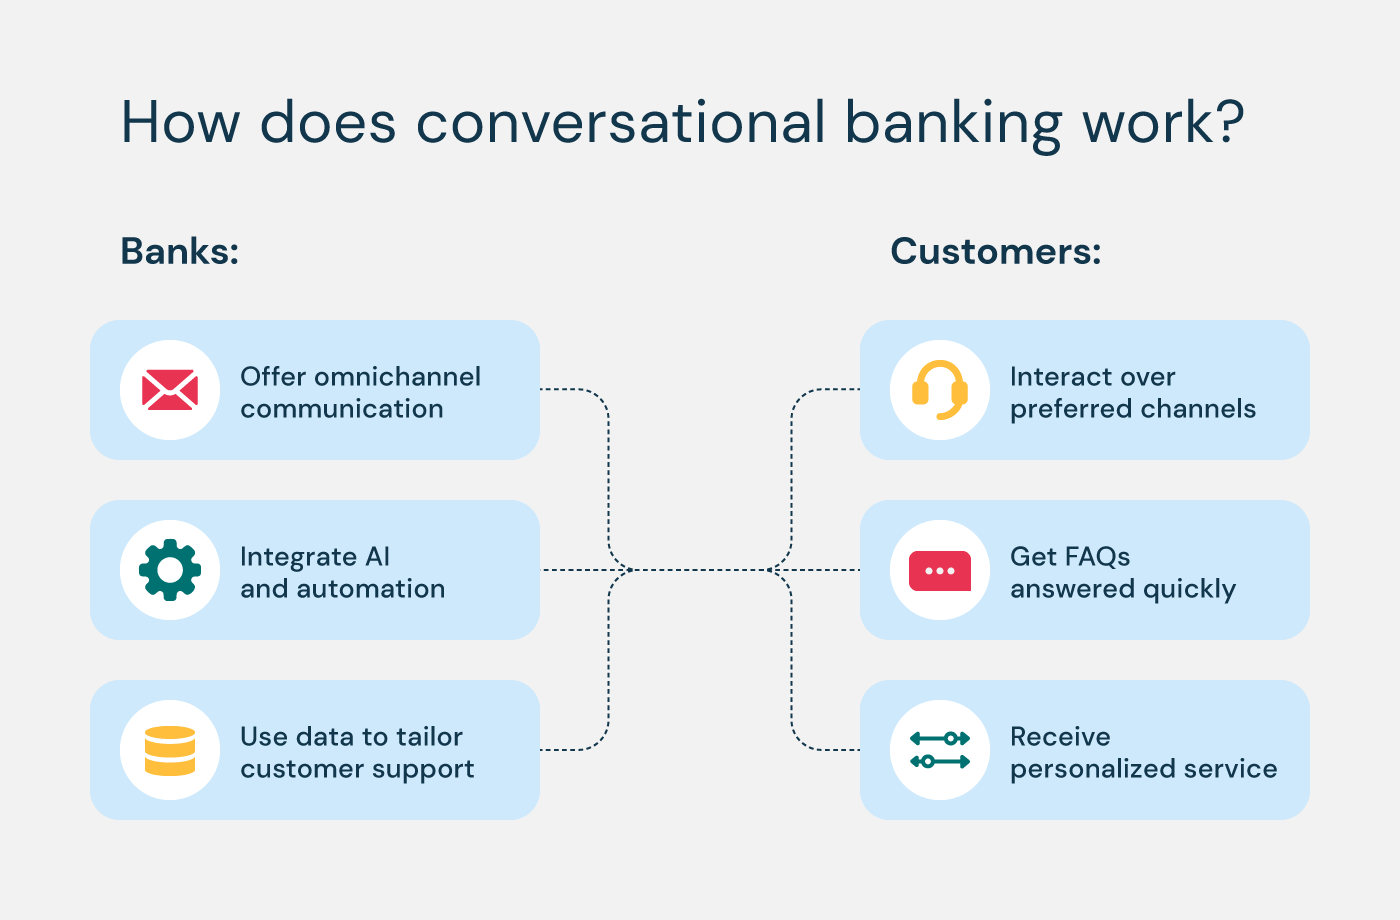 Illustration showing how conversational banking works